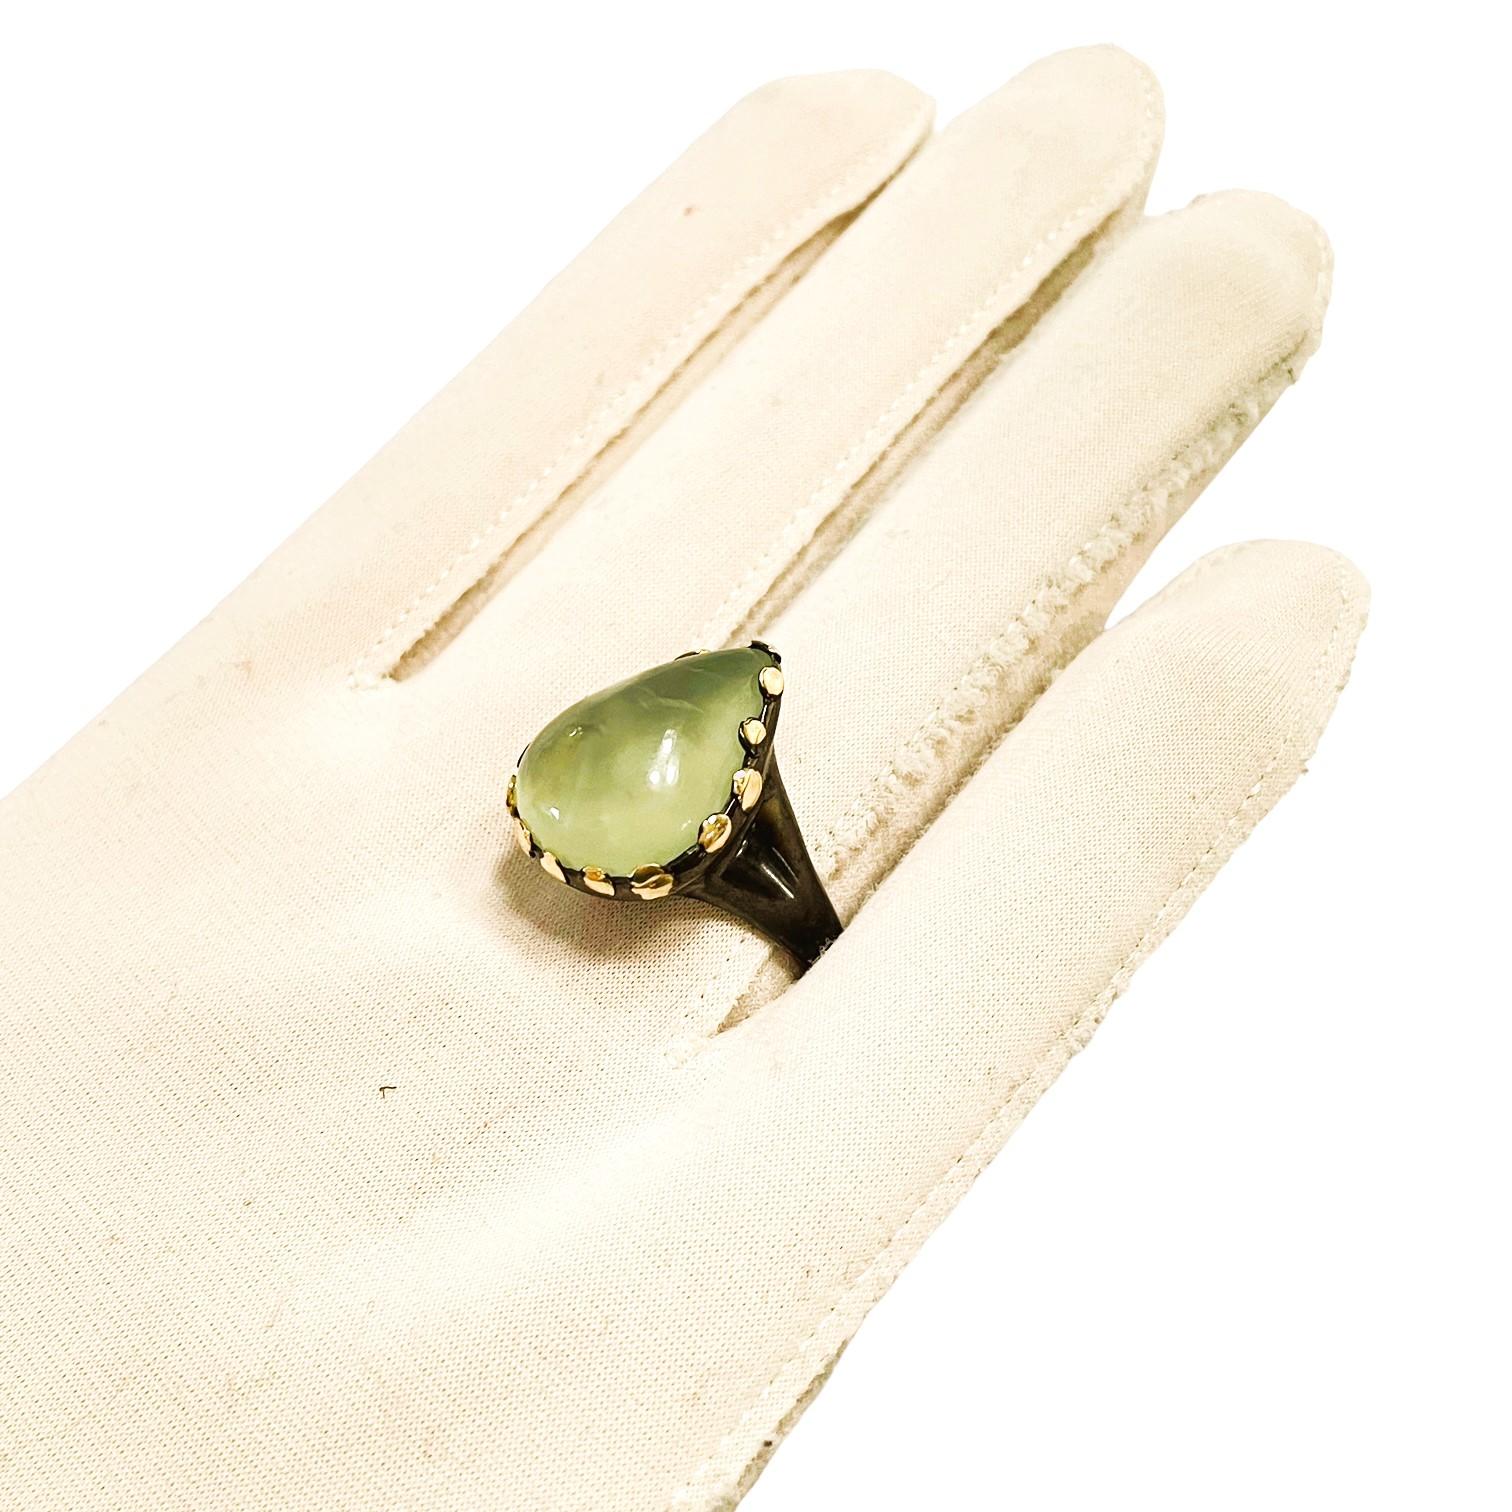 New 19 Ct Natural Green Prehnite 14k Yellow Gold and Oxi-black Sterling Ring 5